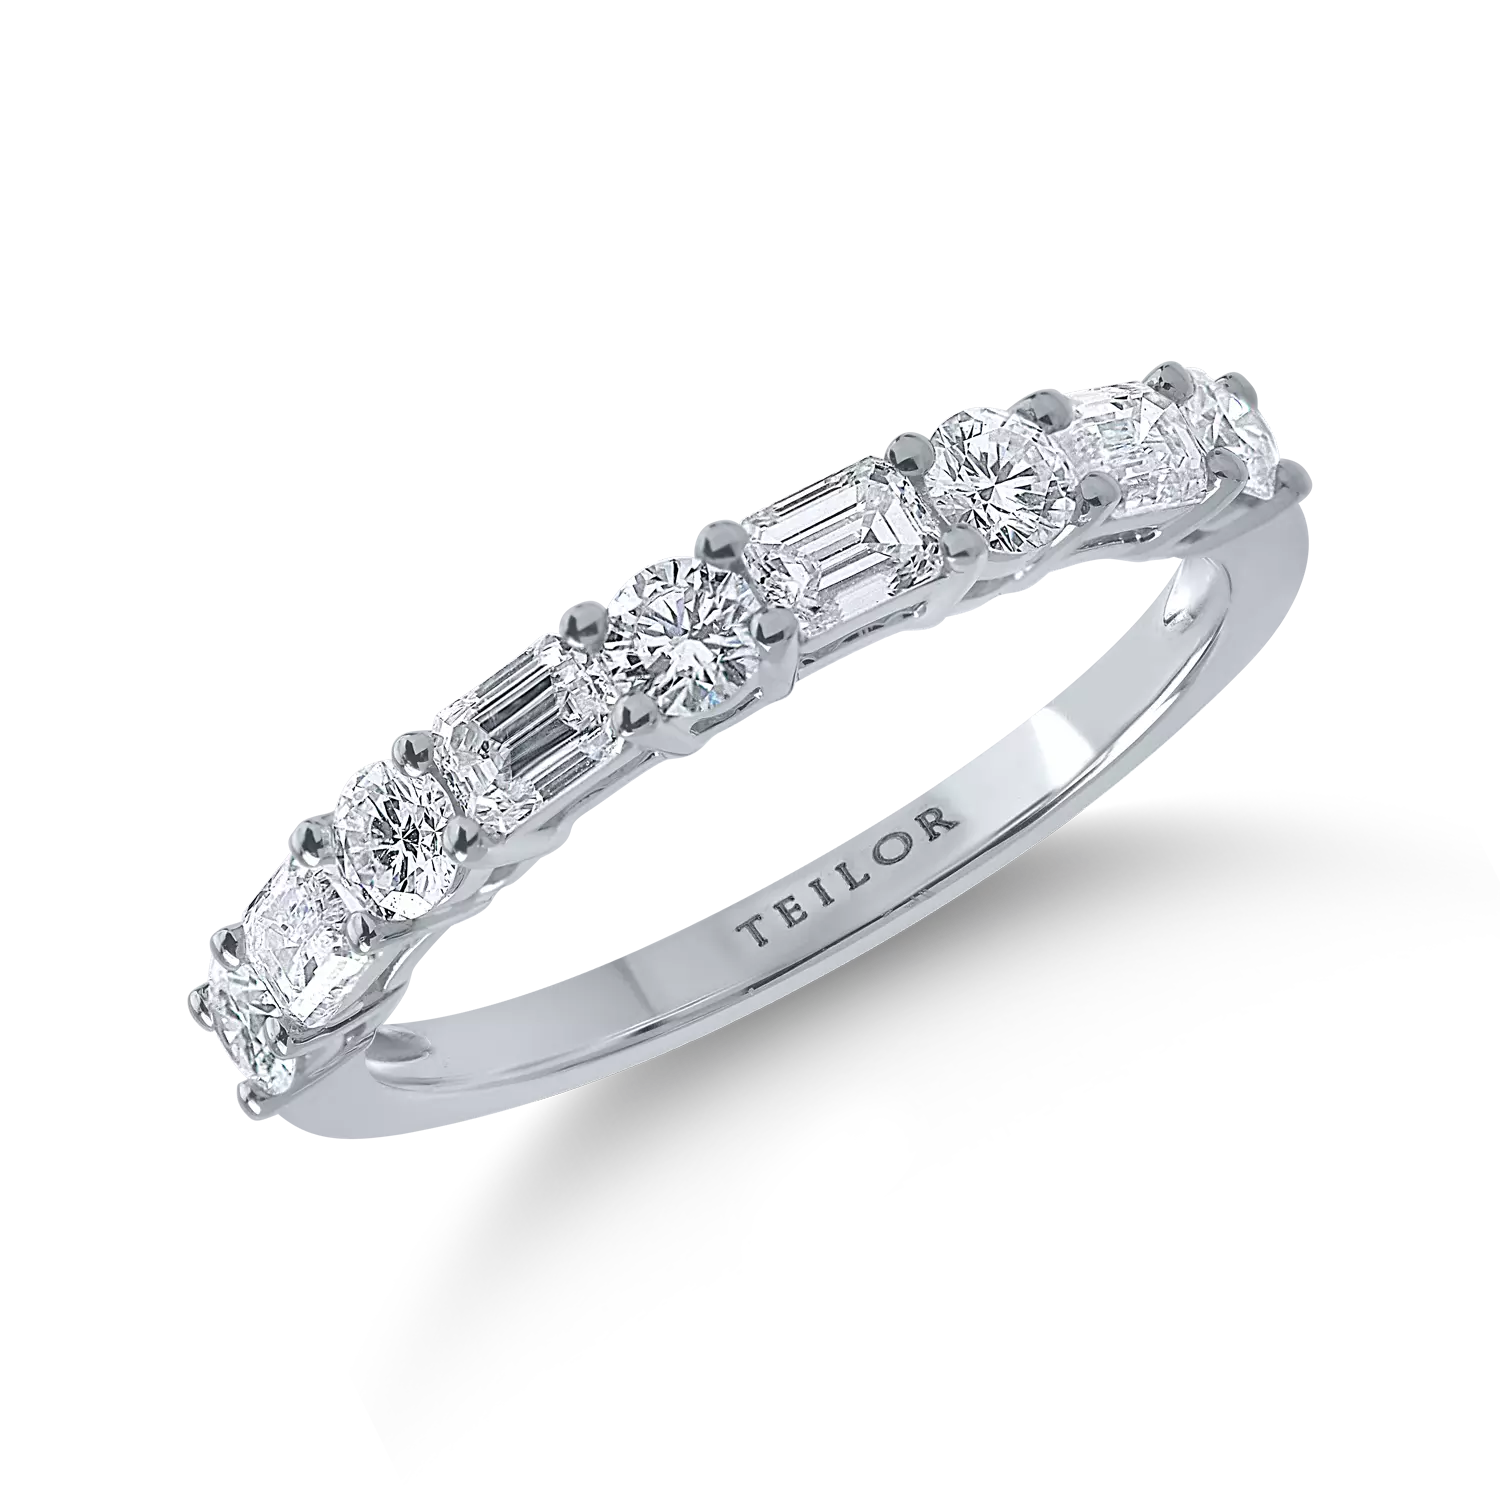 White gold microsetting ring with 0.9ct diamonds